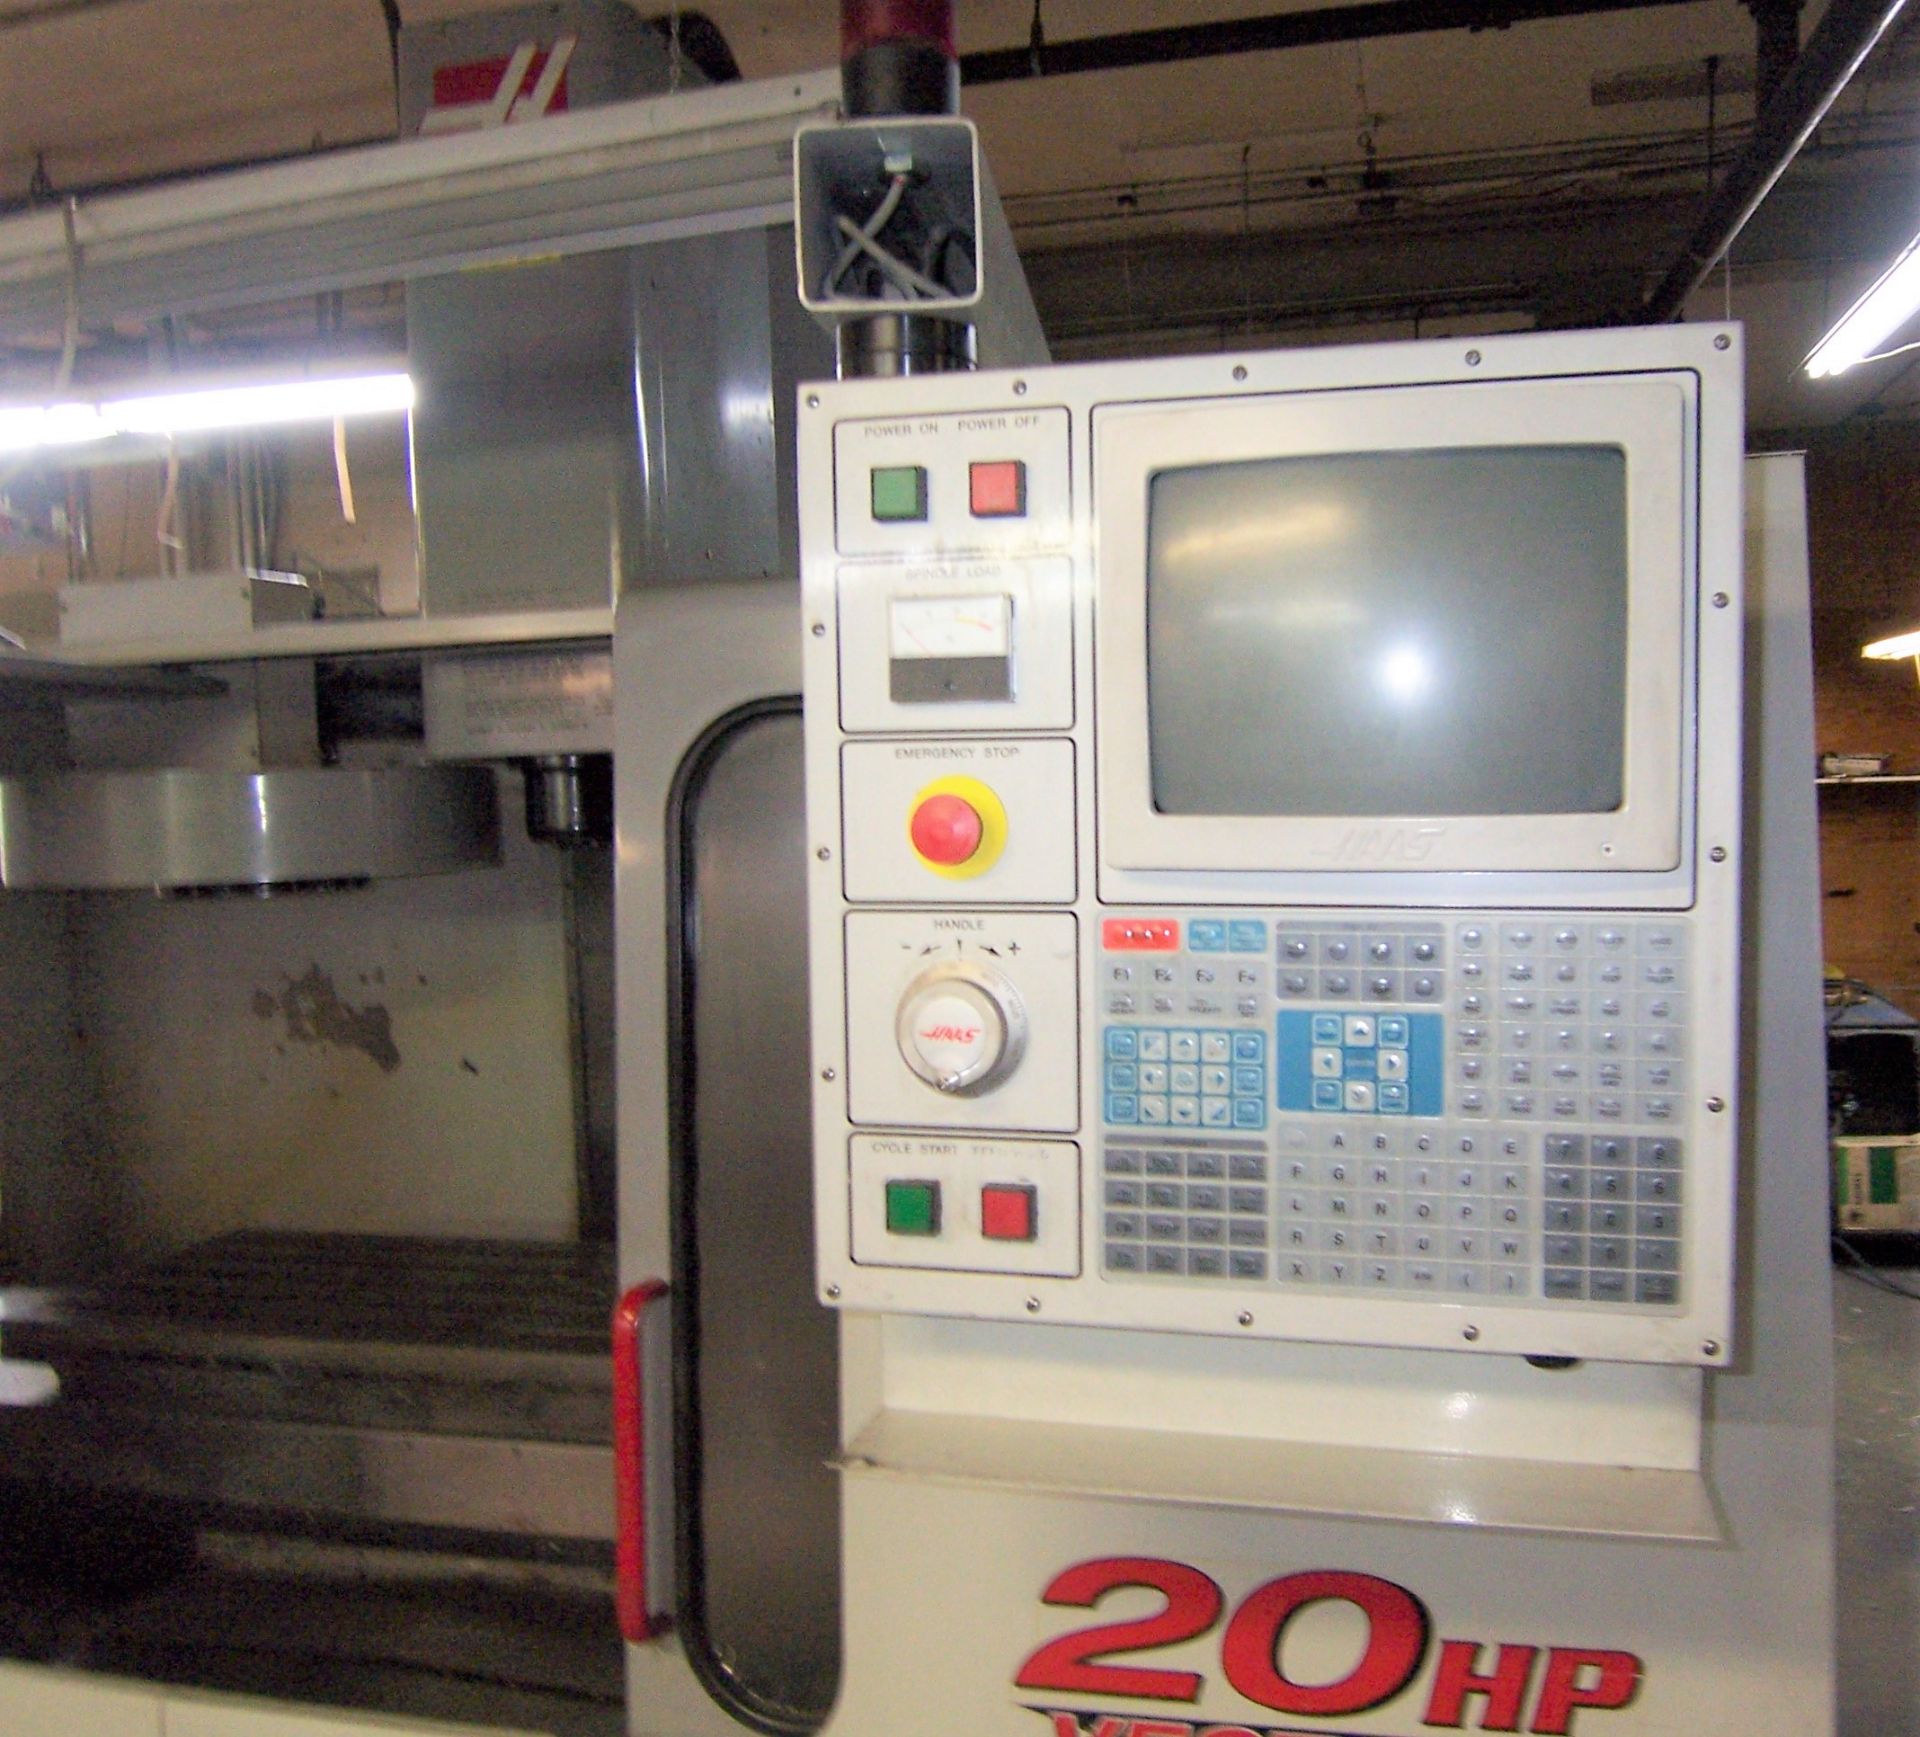 HAAS MDL. VF4 CNC VERTICAL MACHINING CENTER - Image 4 of 5